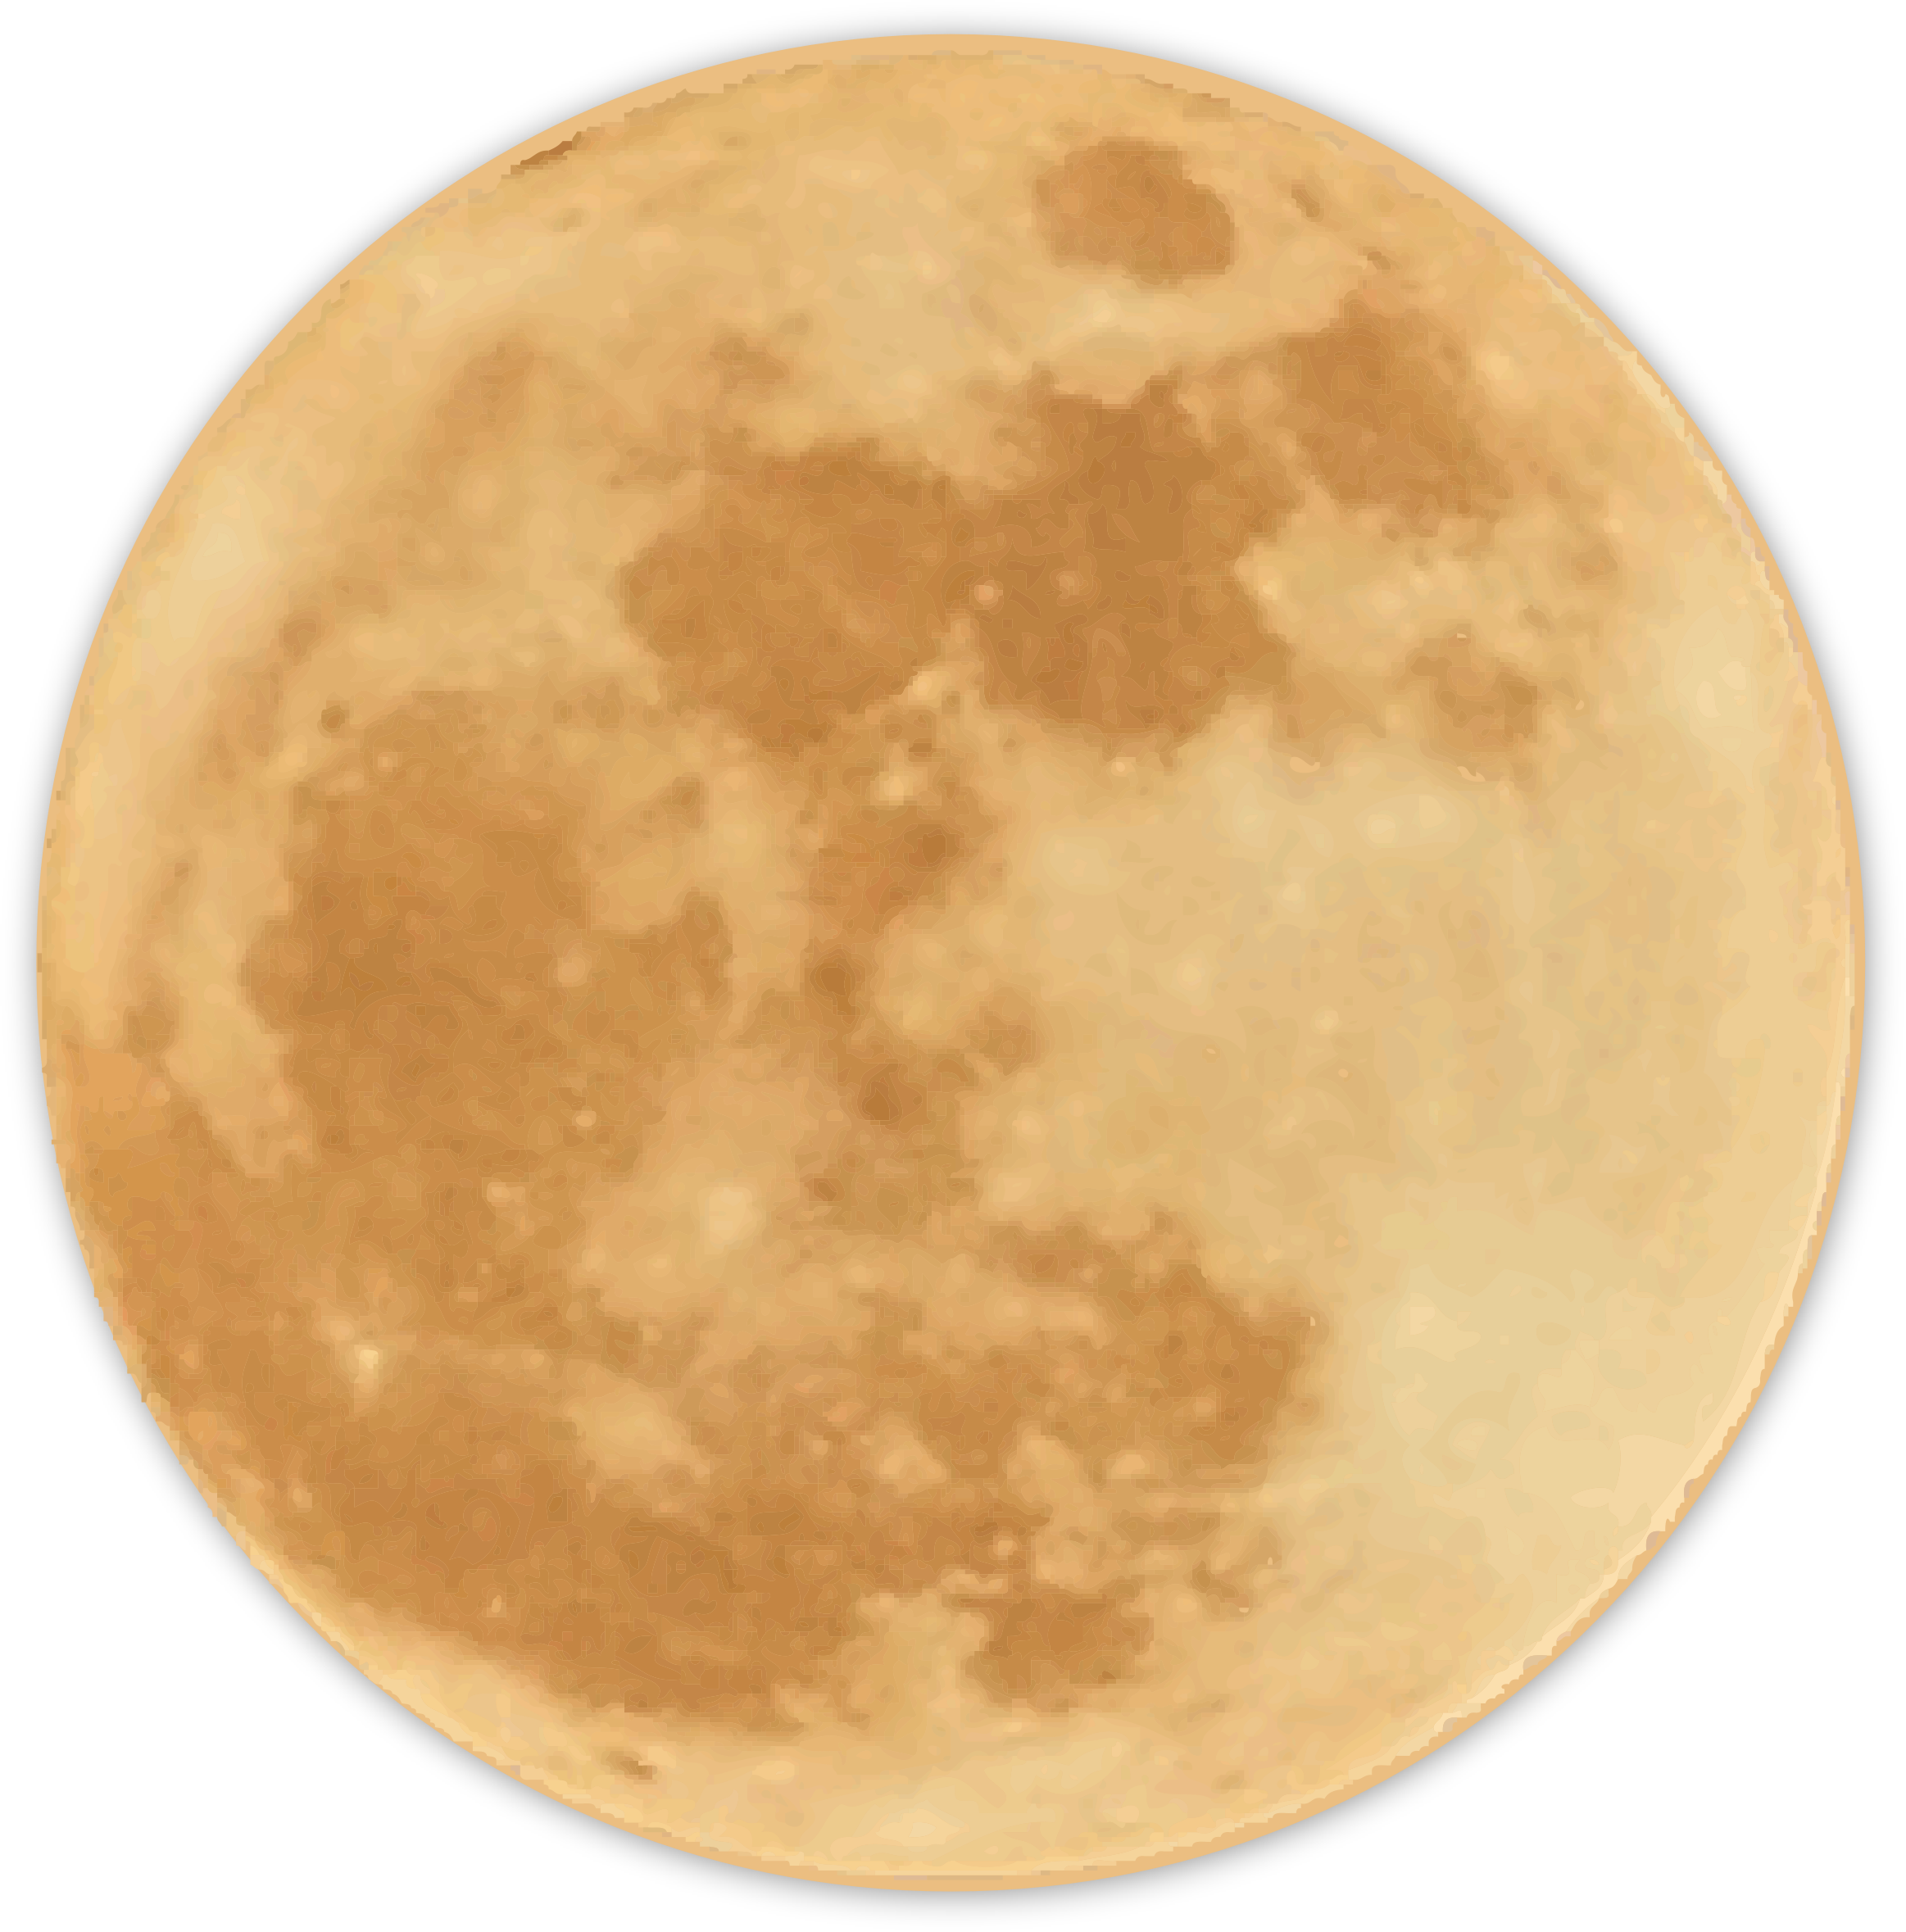 A Full Moon With A Black Background